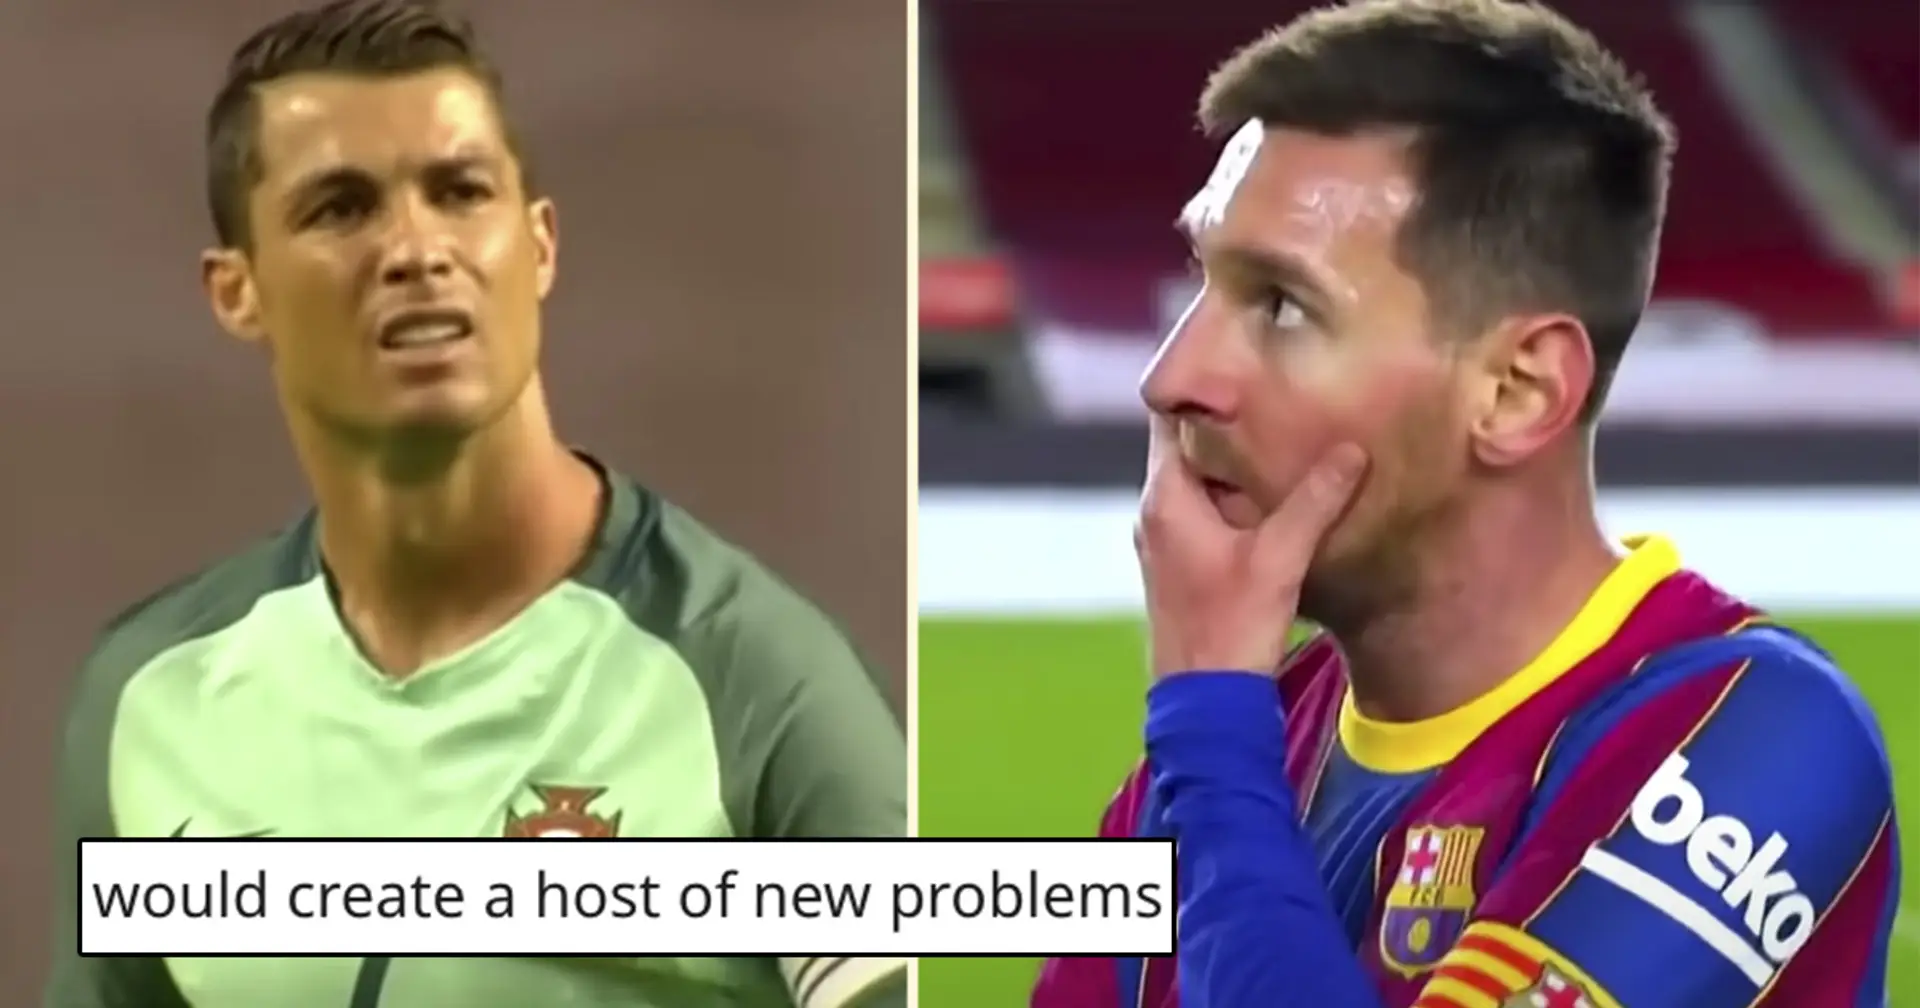 'Huge marketing boon': Real Madrid fan explains why he'd actually love to see Ronaldo at Barca